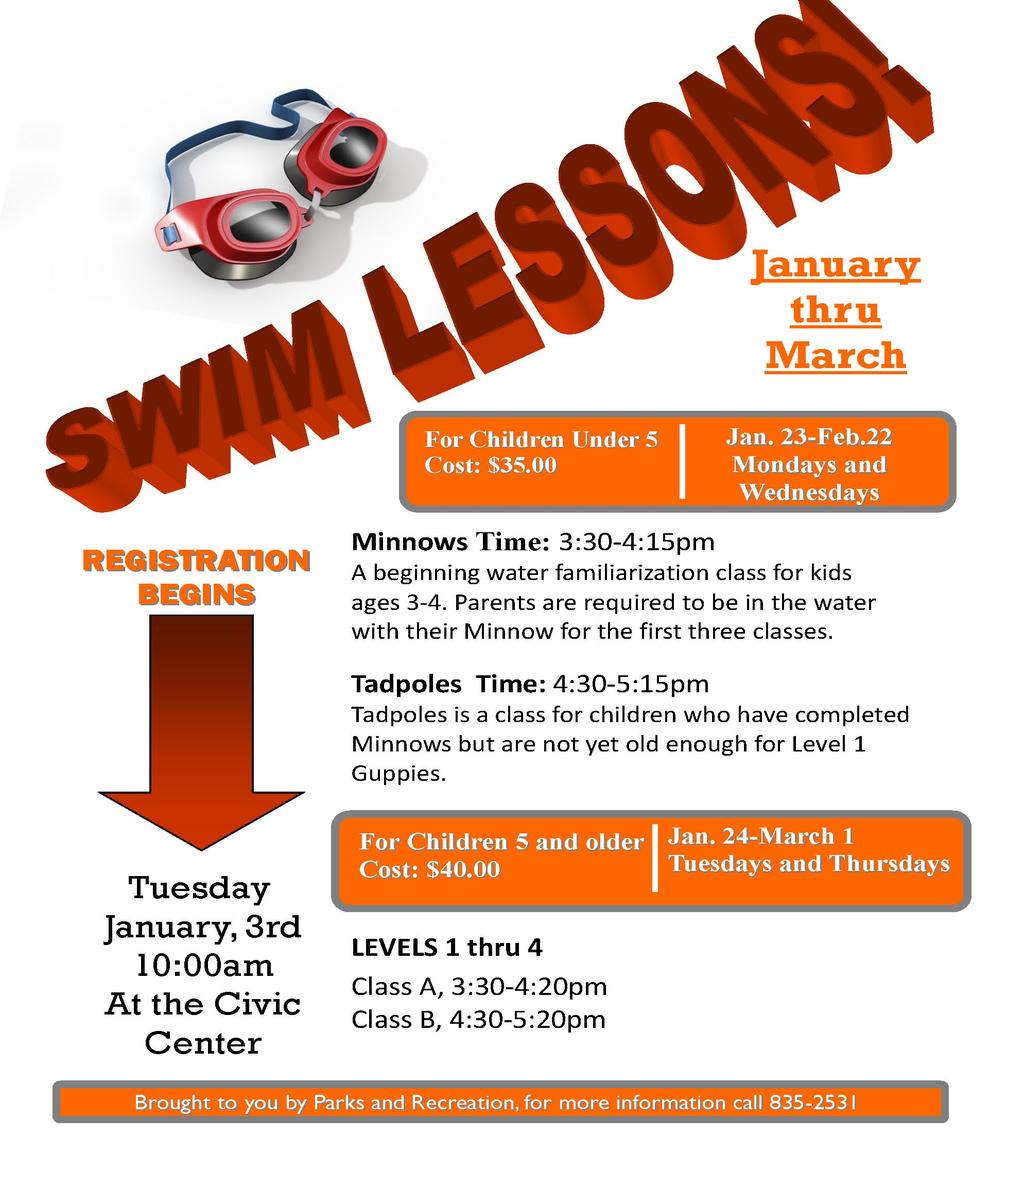 7 THE VALDEZ POOL Become a SWIM INSTRUCTOR Learn to teach children how to swim and possibly get a job at the Valdez Pool! Dec 19-29 Tues-Thurs 3:00-5:30pm FREE!